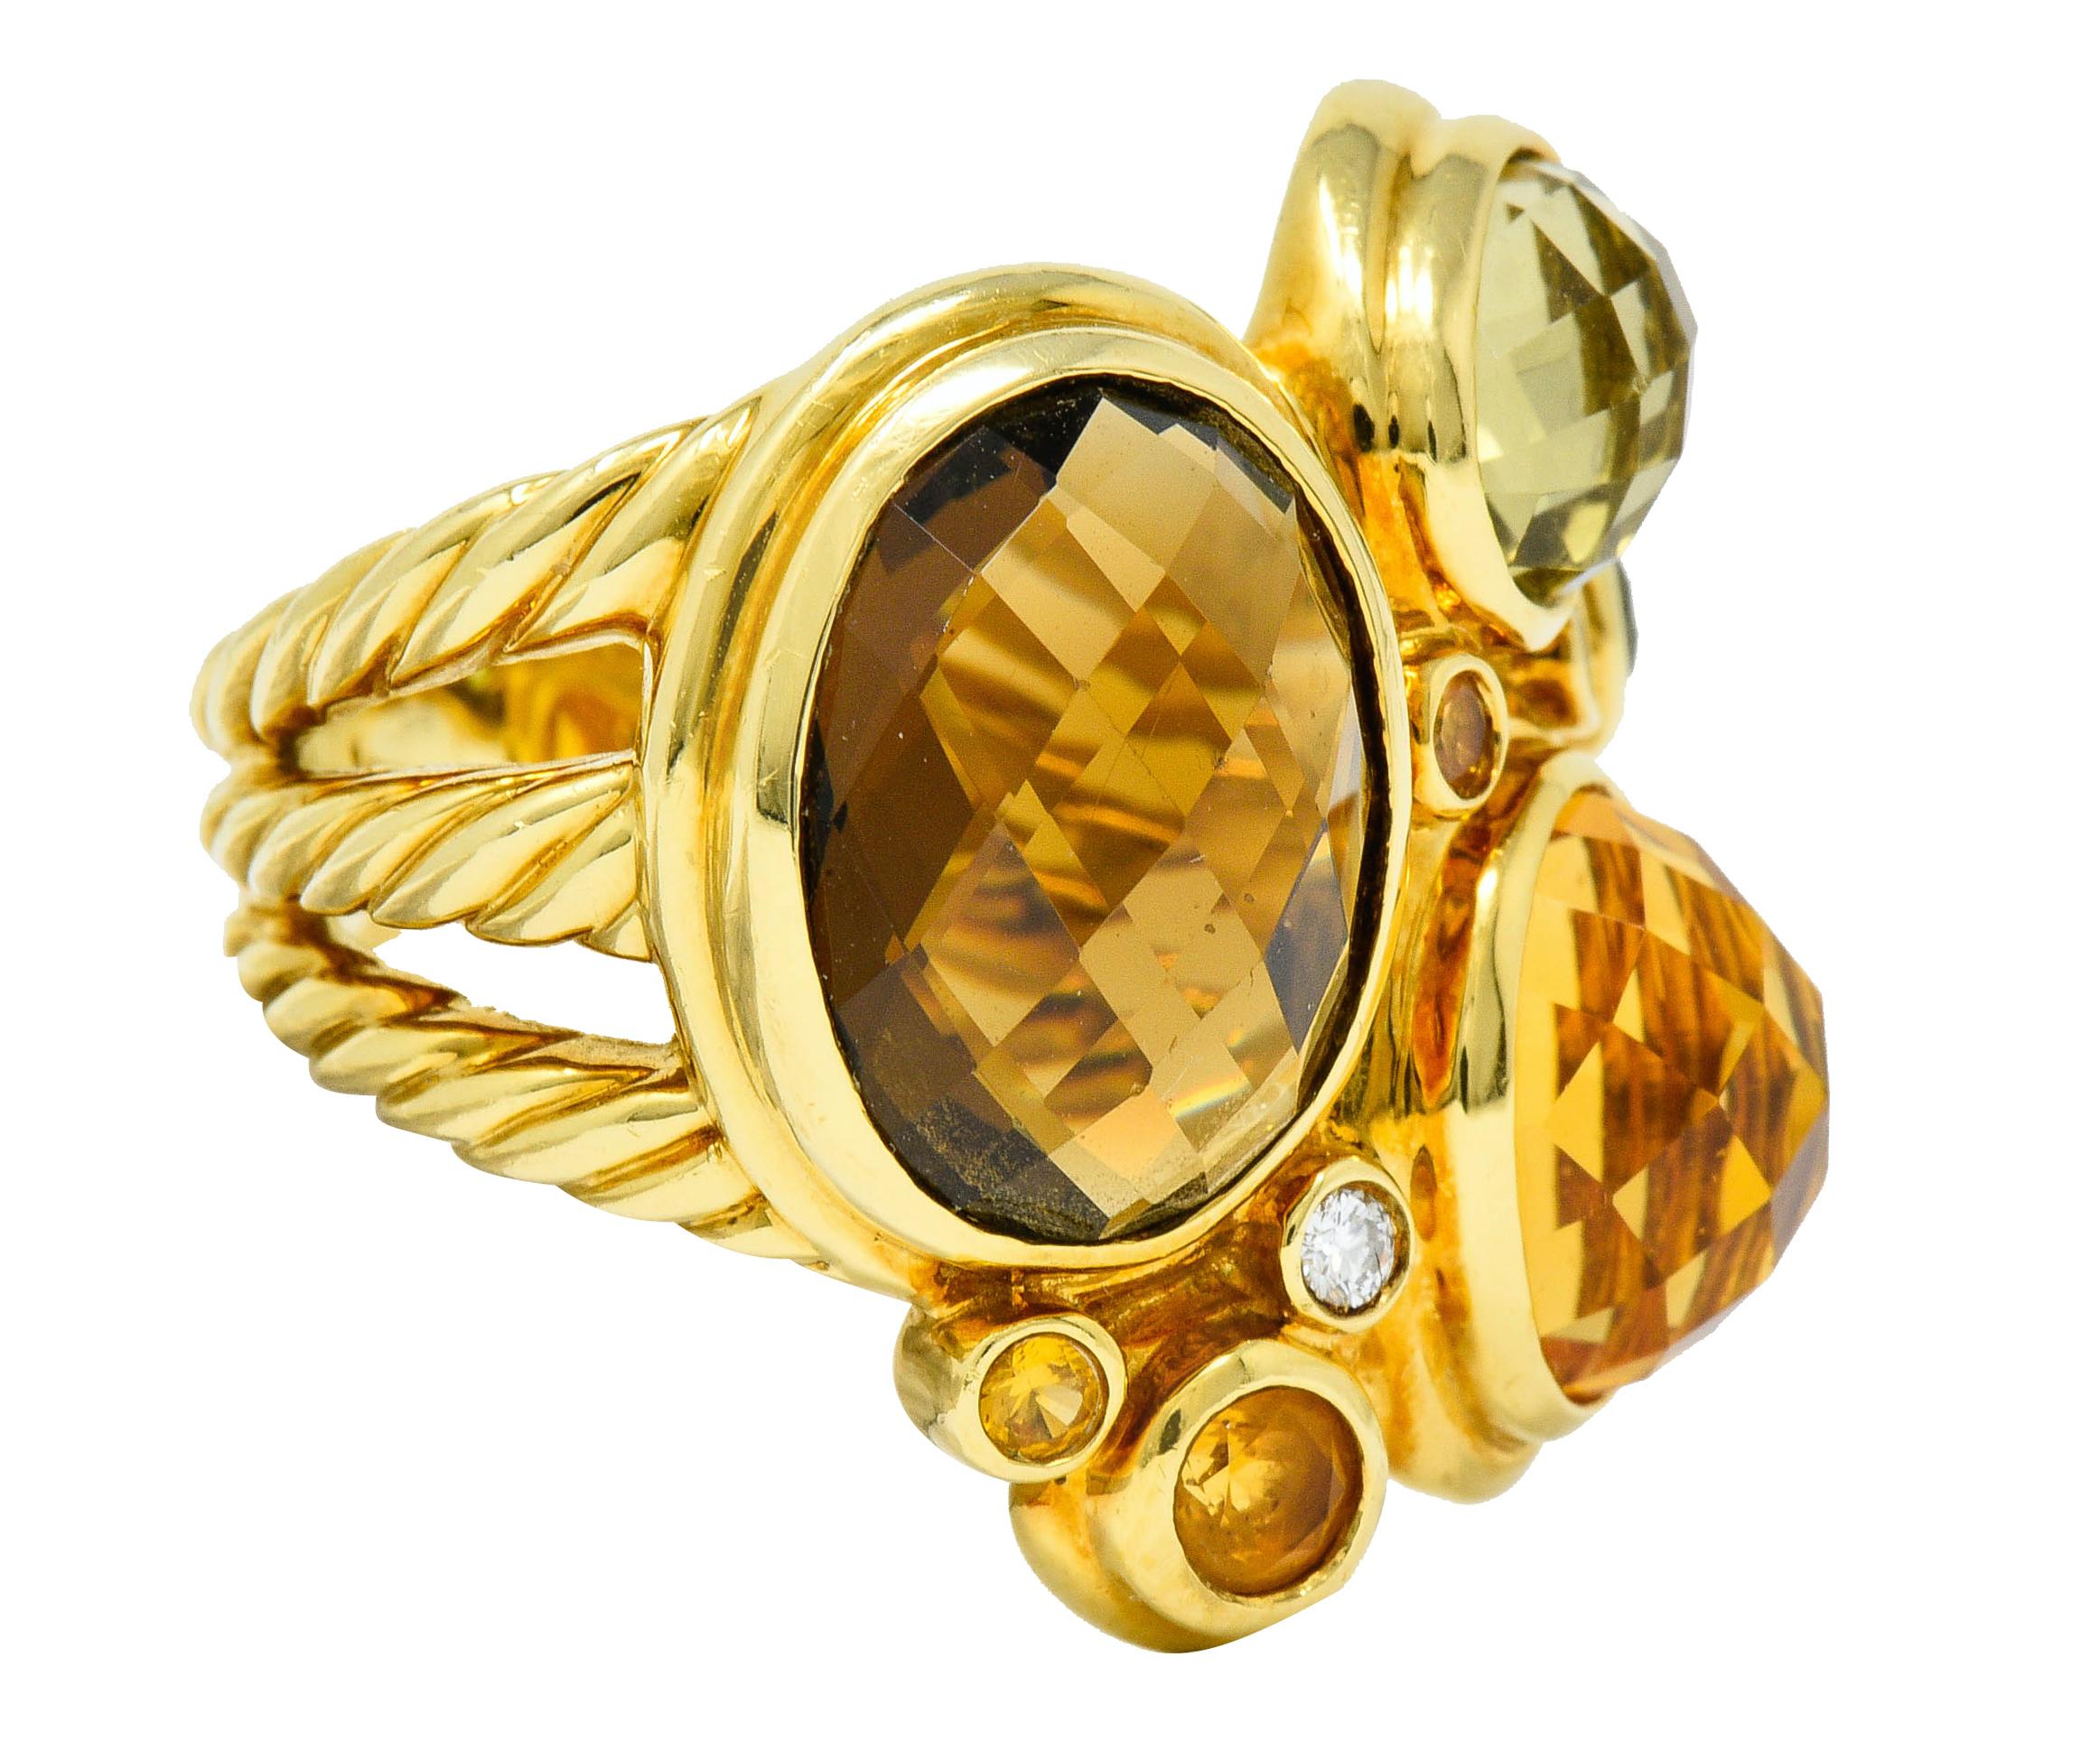 Ring is designed as an asymmetrical cluster of bezel set gemstones

Featuring smoky topaz, citrine, peridot, and others - transparent and fancifully faceted

Accented by round brilliant cut diamonds weighing approximately 0.08 carat; eye-clean and